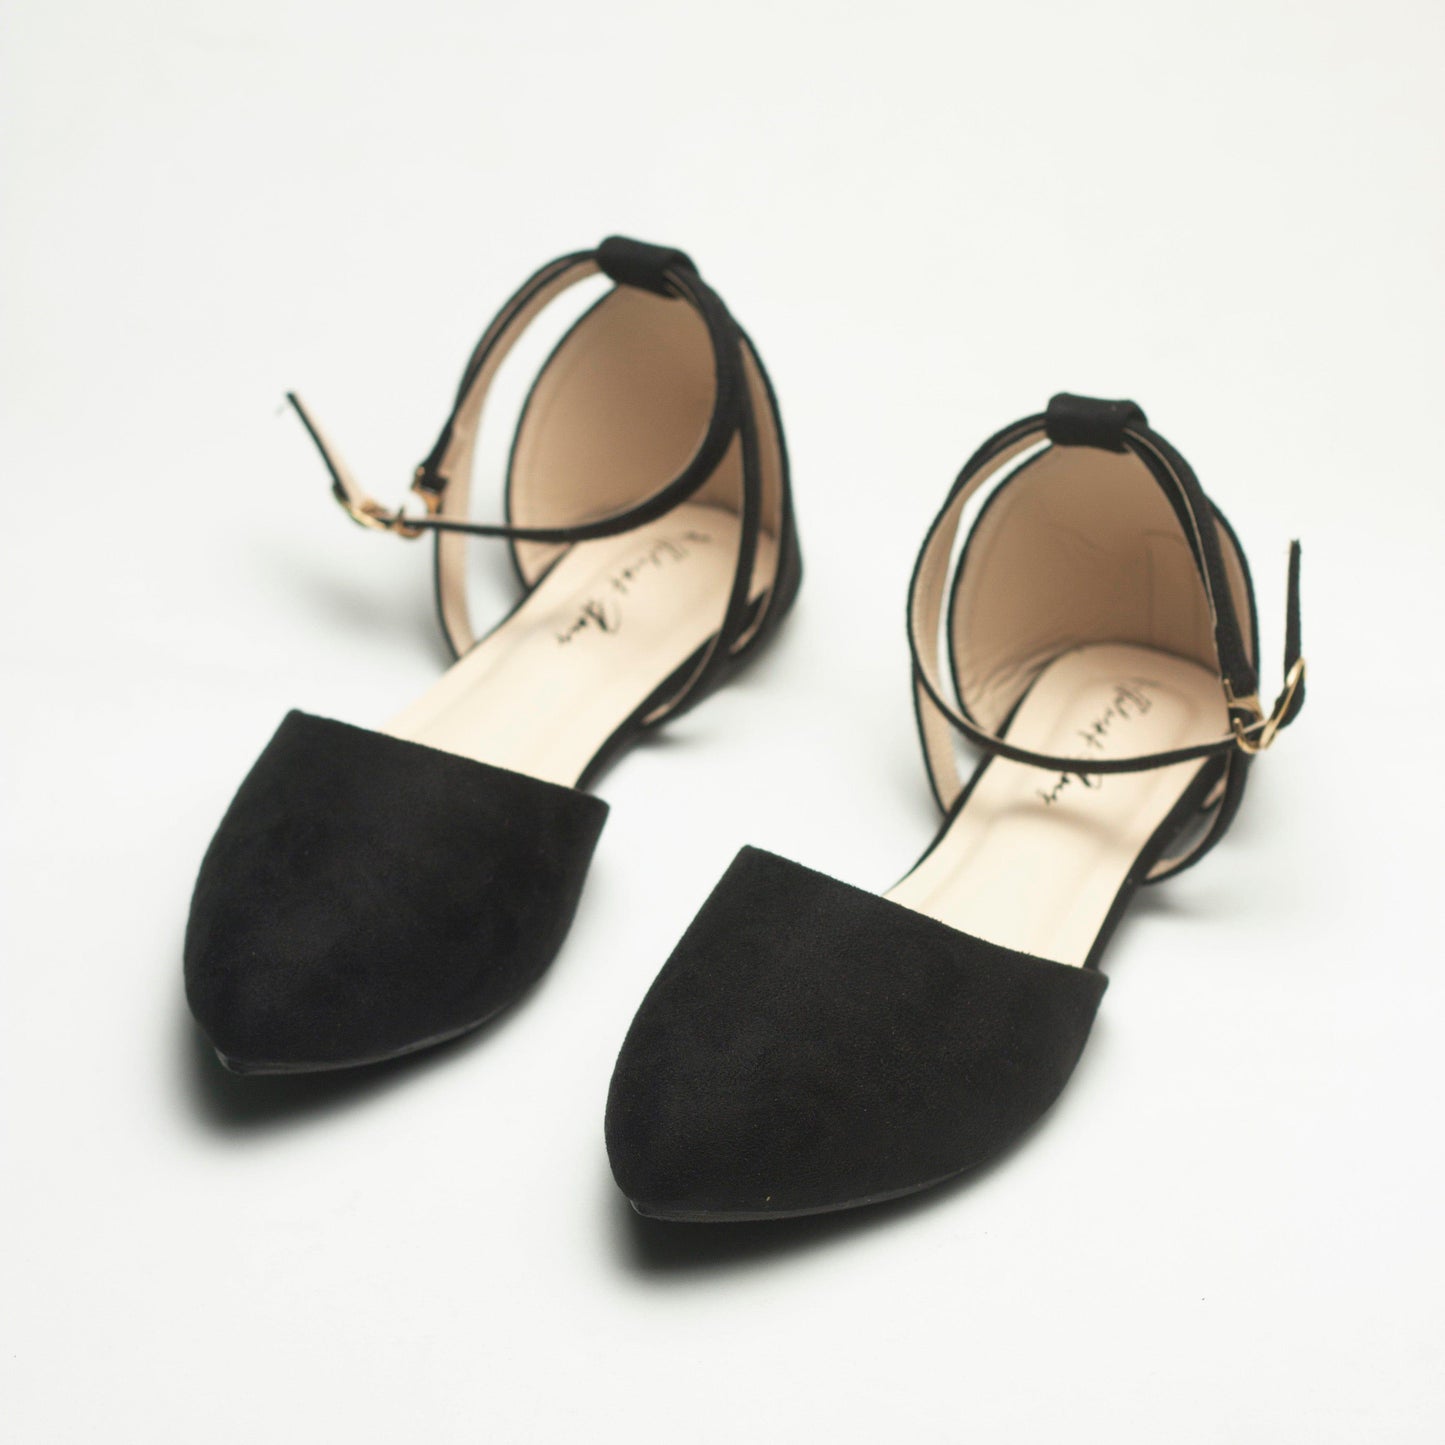 Nawabi Shoes BD Shoes 35 / black Flat Sandals for Women: The Must-Have for Your Summer Wardrobe